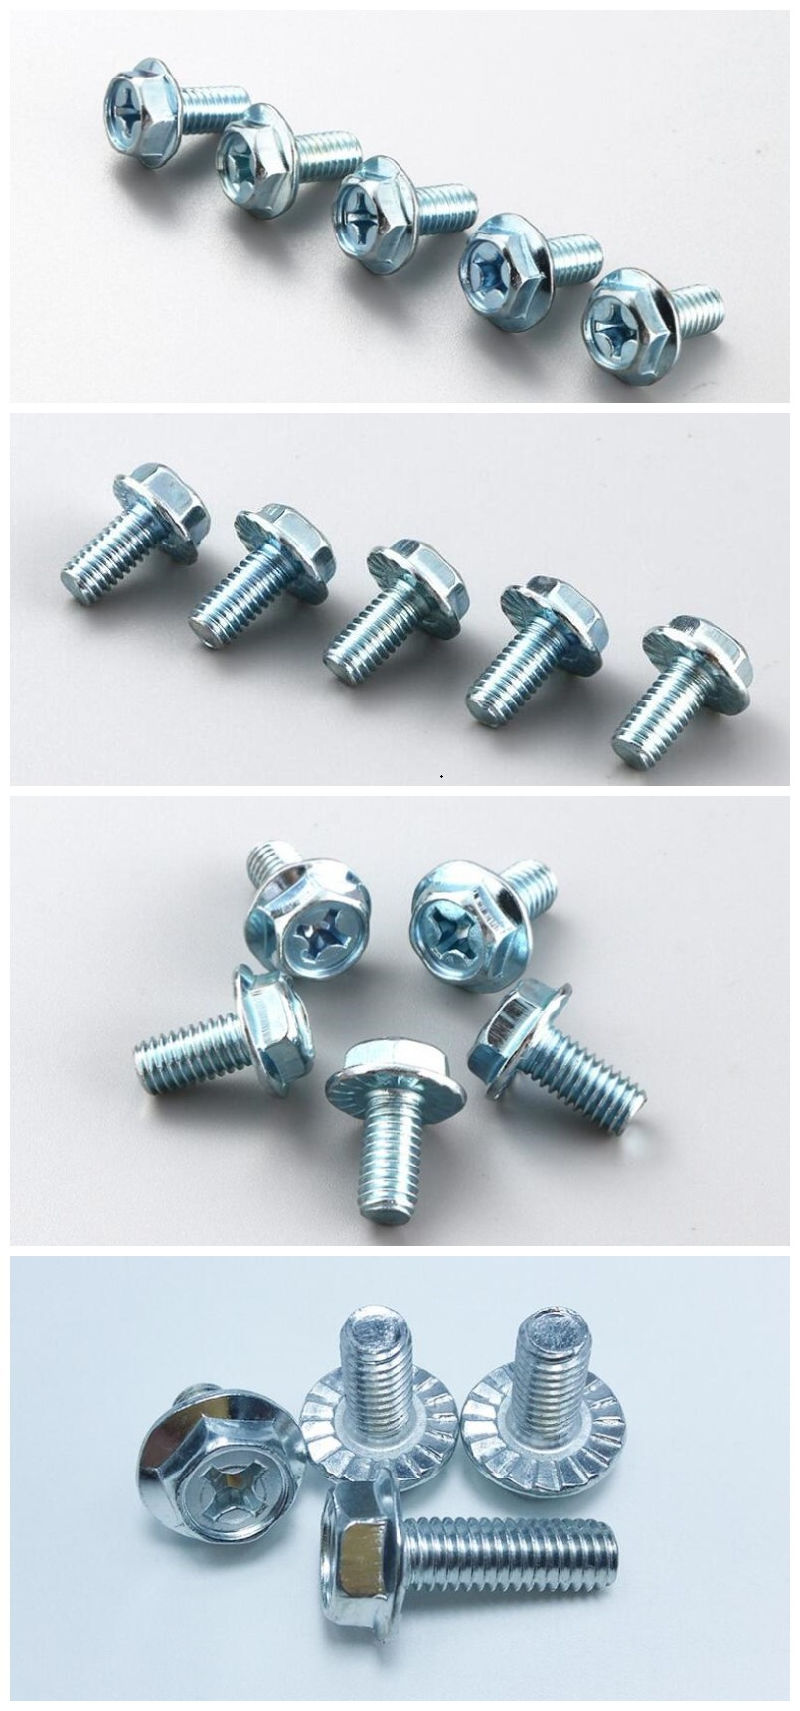 Hot Selling Cross Recessed Hex Flange Bolt with Zinc Coating